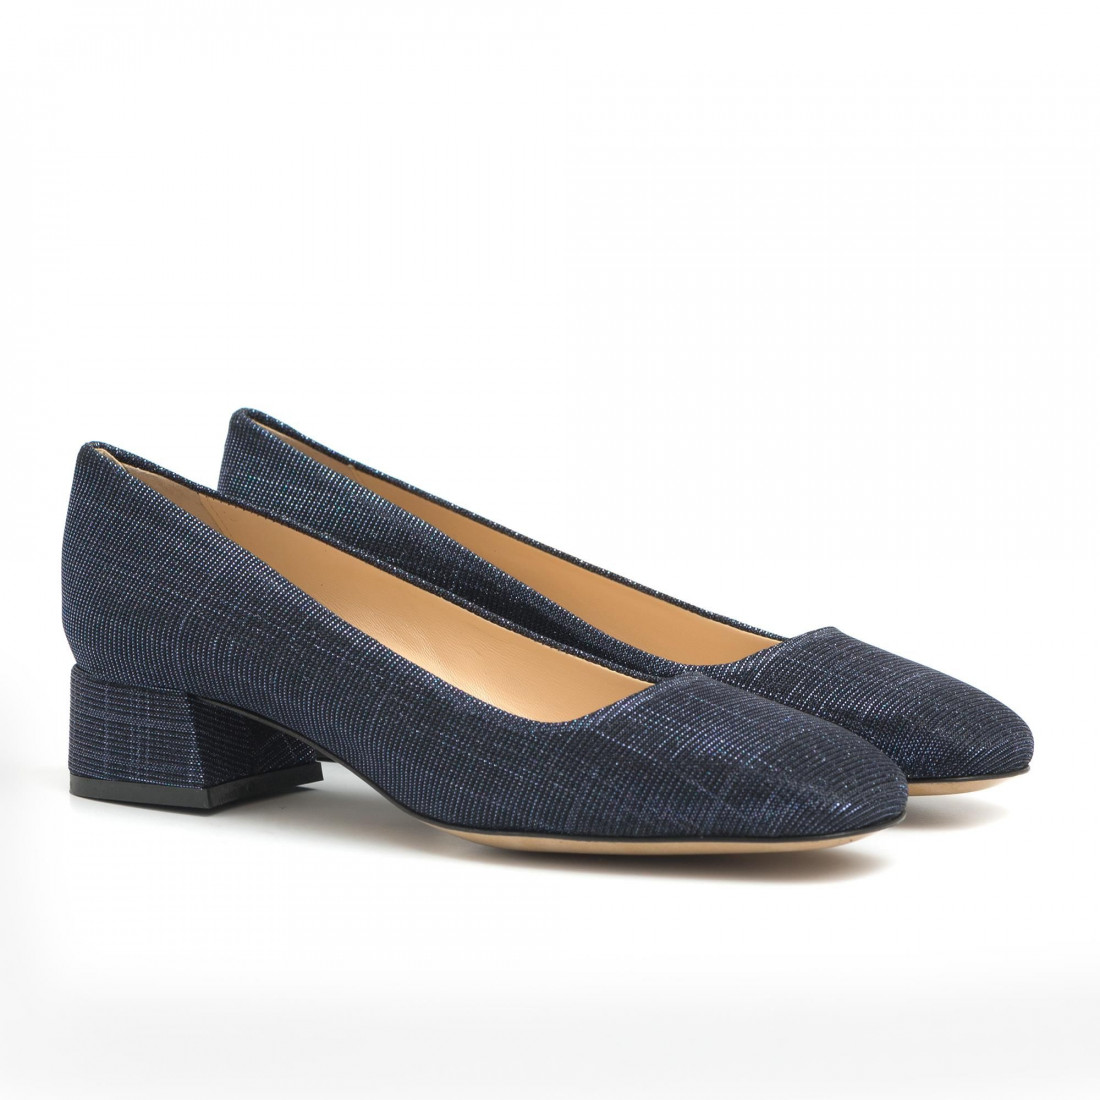 Low heel round toe shoes in blue fabric